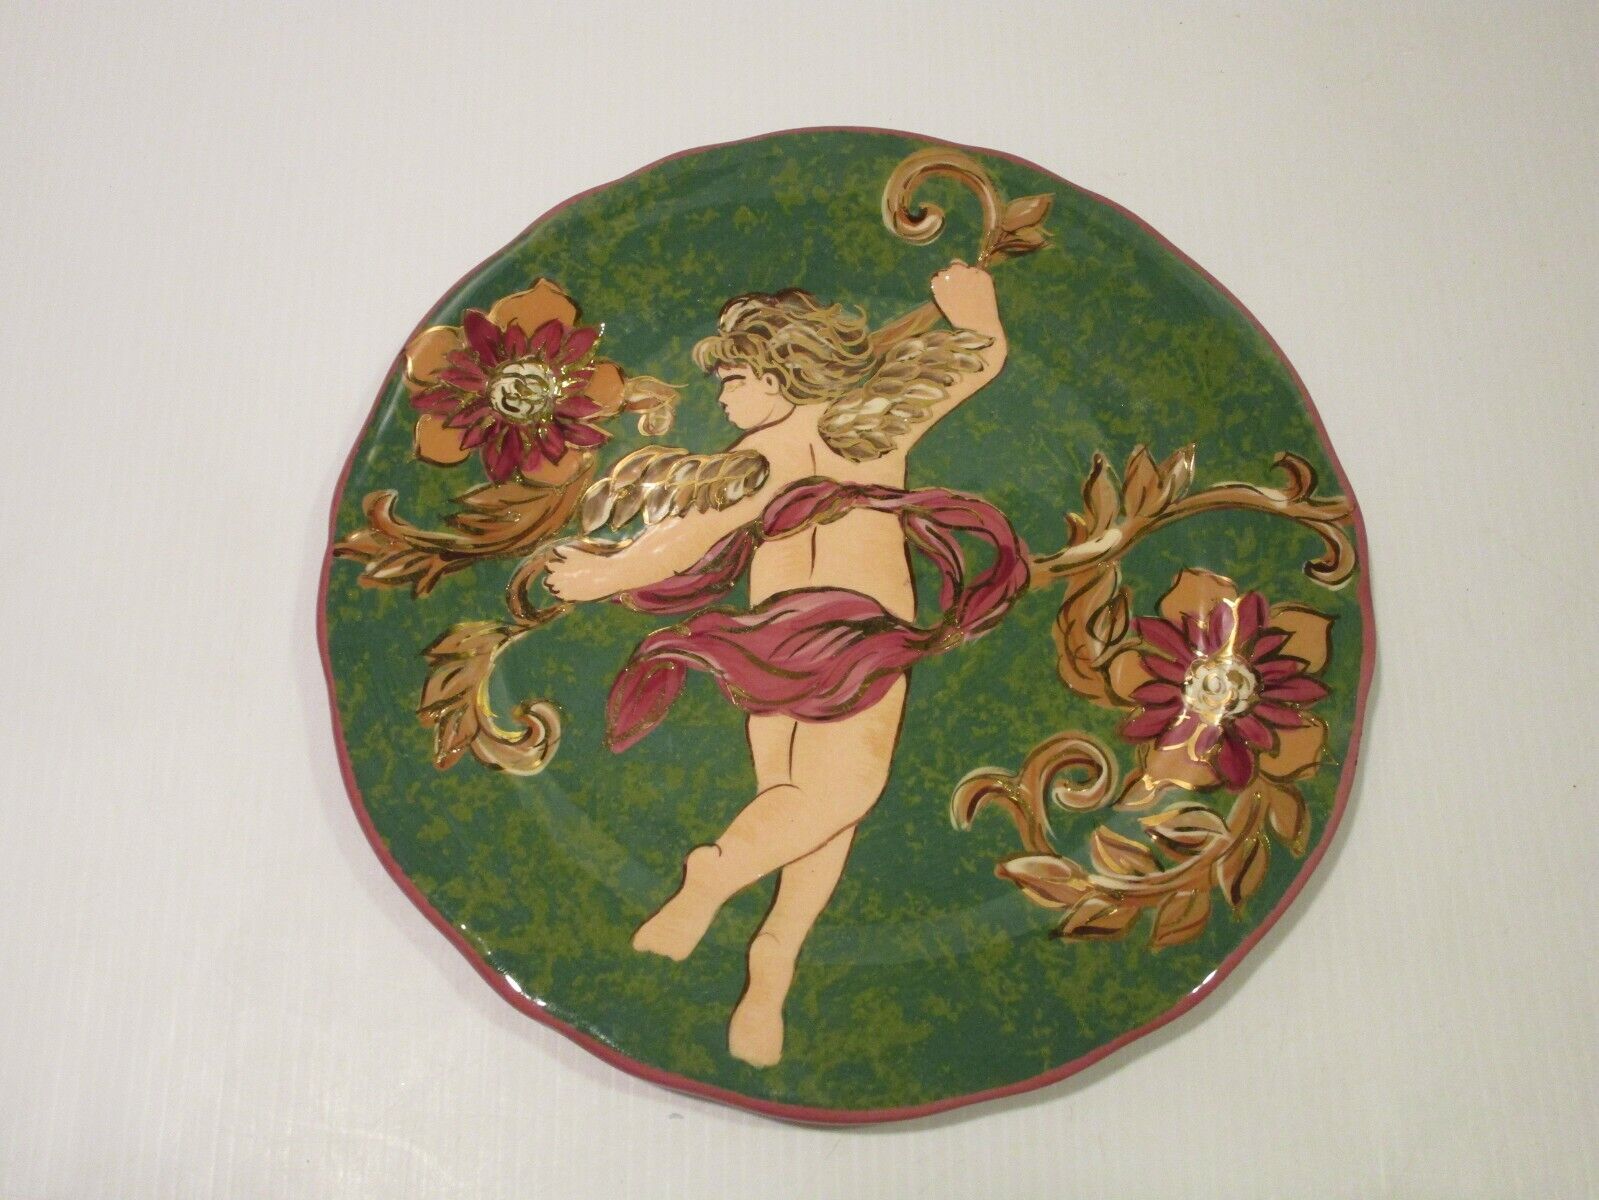 Lesal Home Pottery Decorative Plate, Cherub and Florals